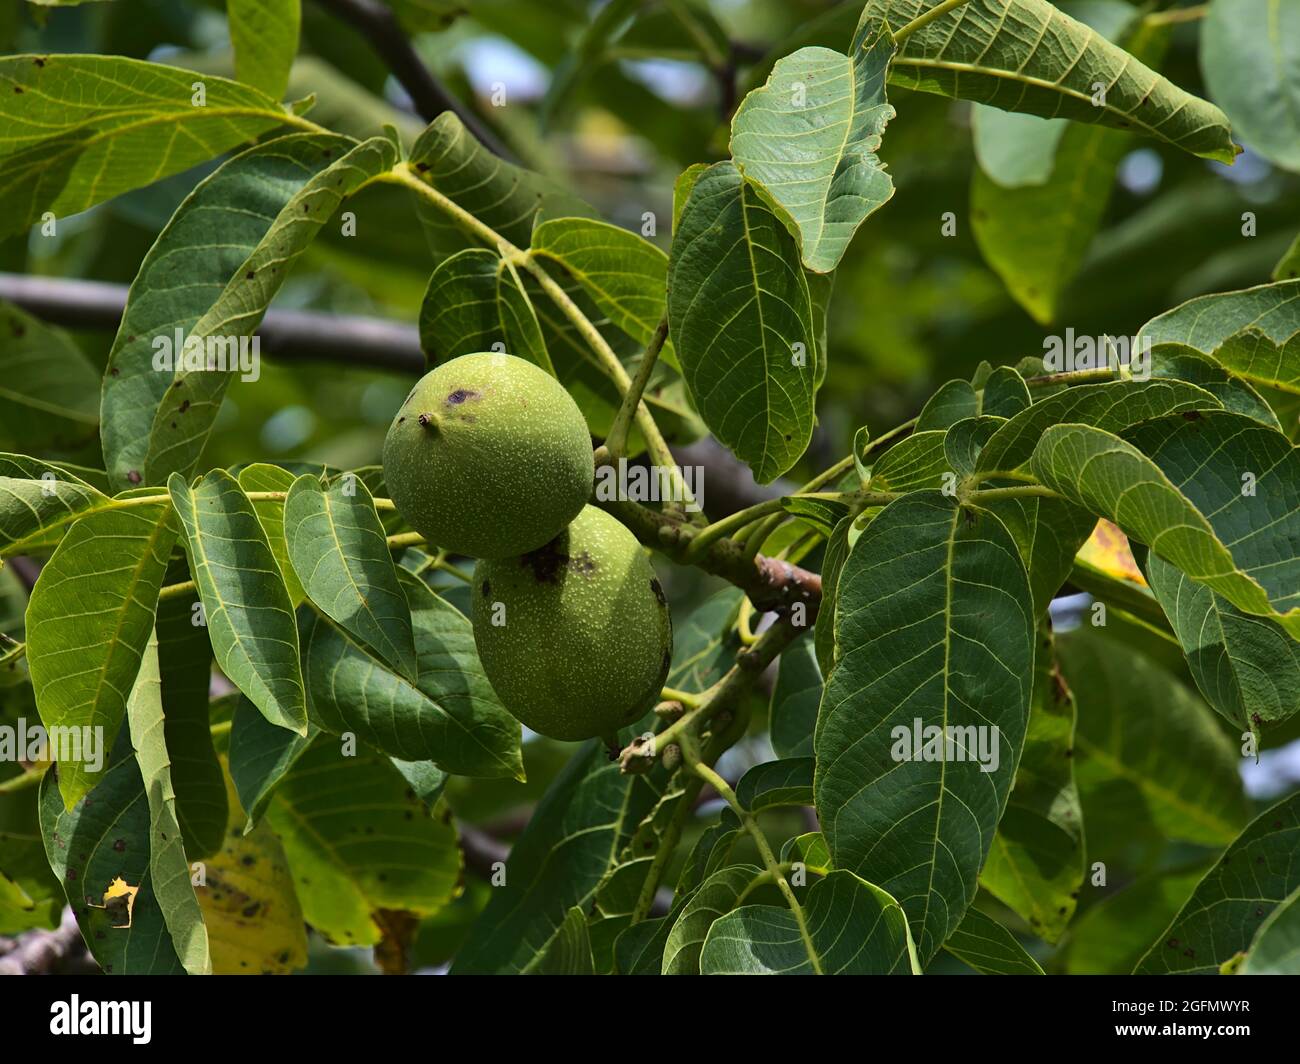 Closeup view of juglans regia tree, also called Persian, English or Carpathian walnut, with green fruits and leaves on summer day on Limburg hill. Stock Photo